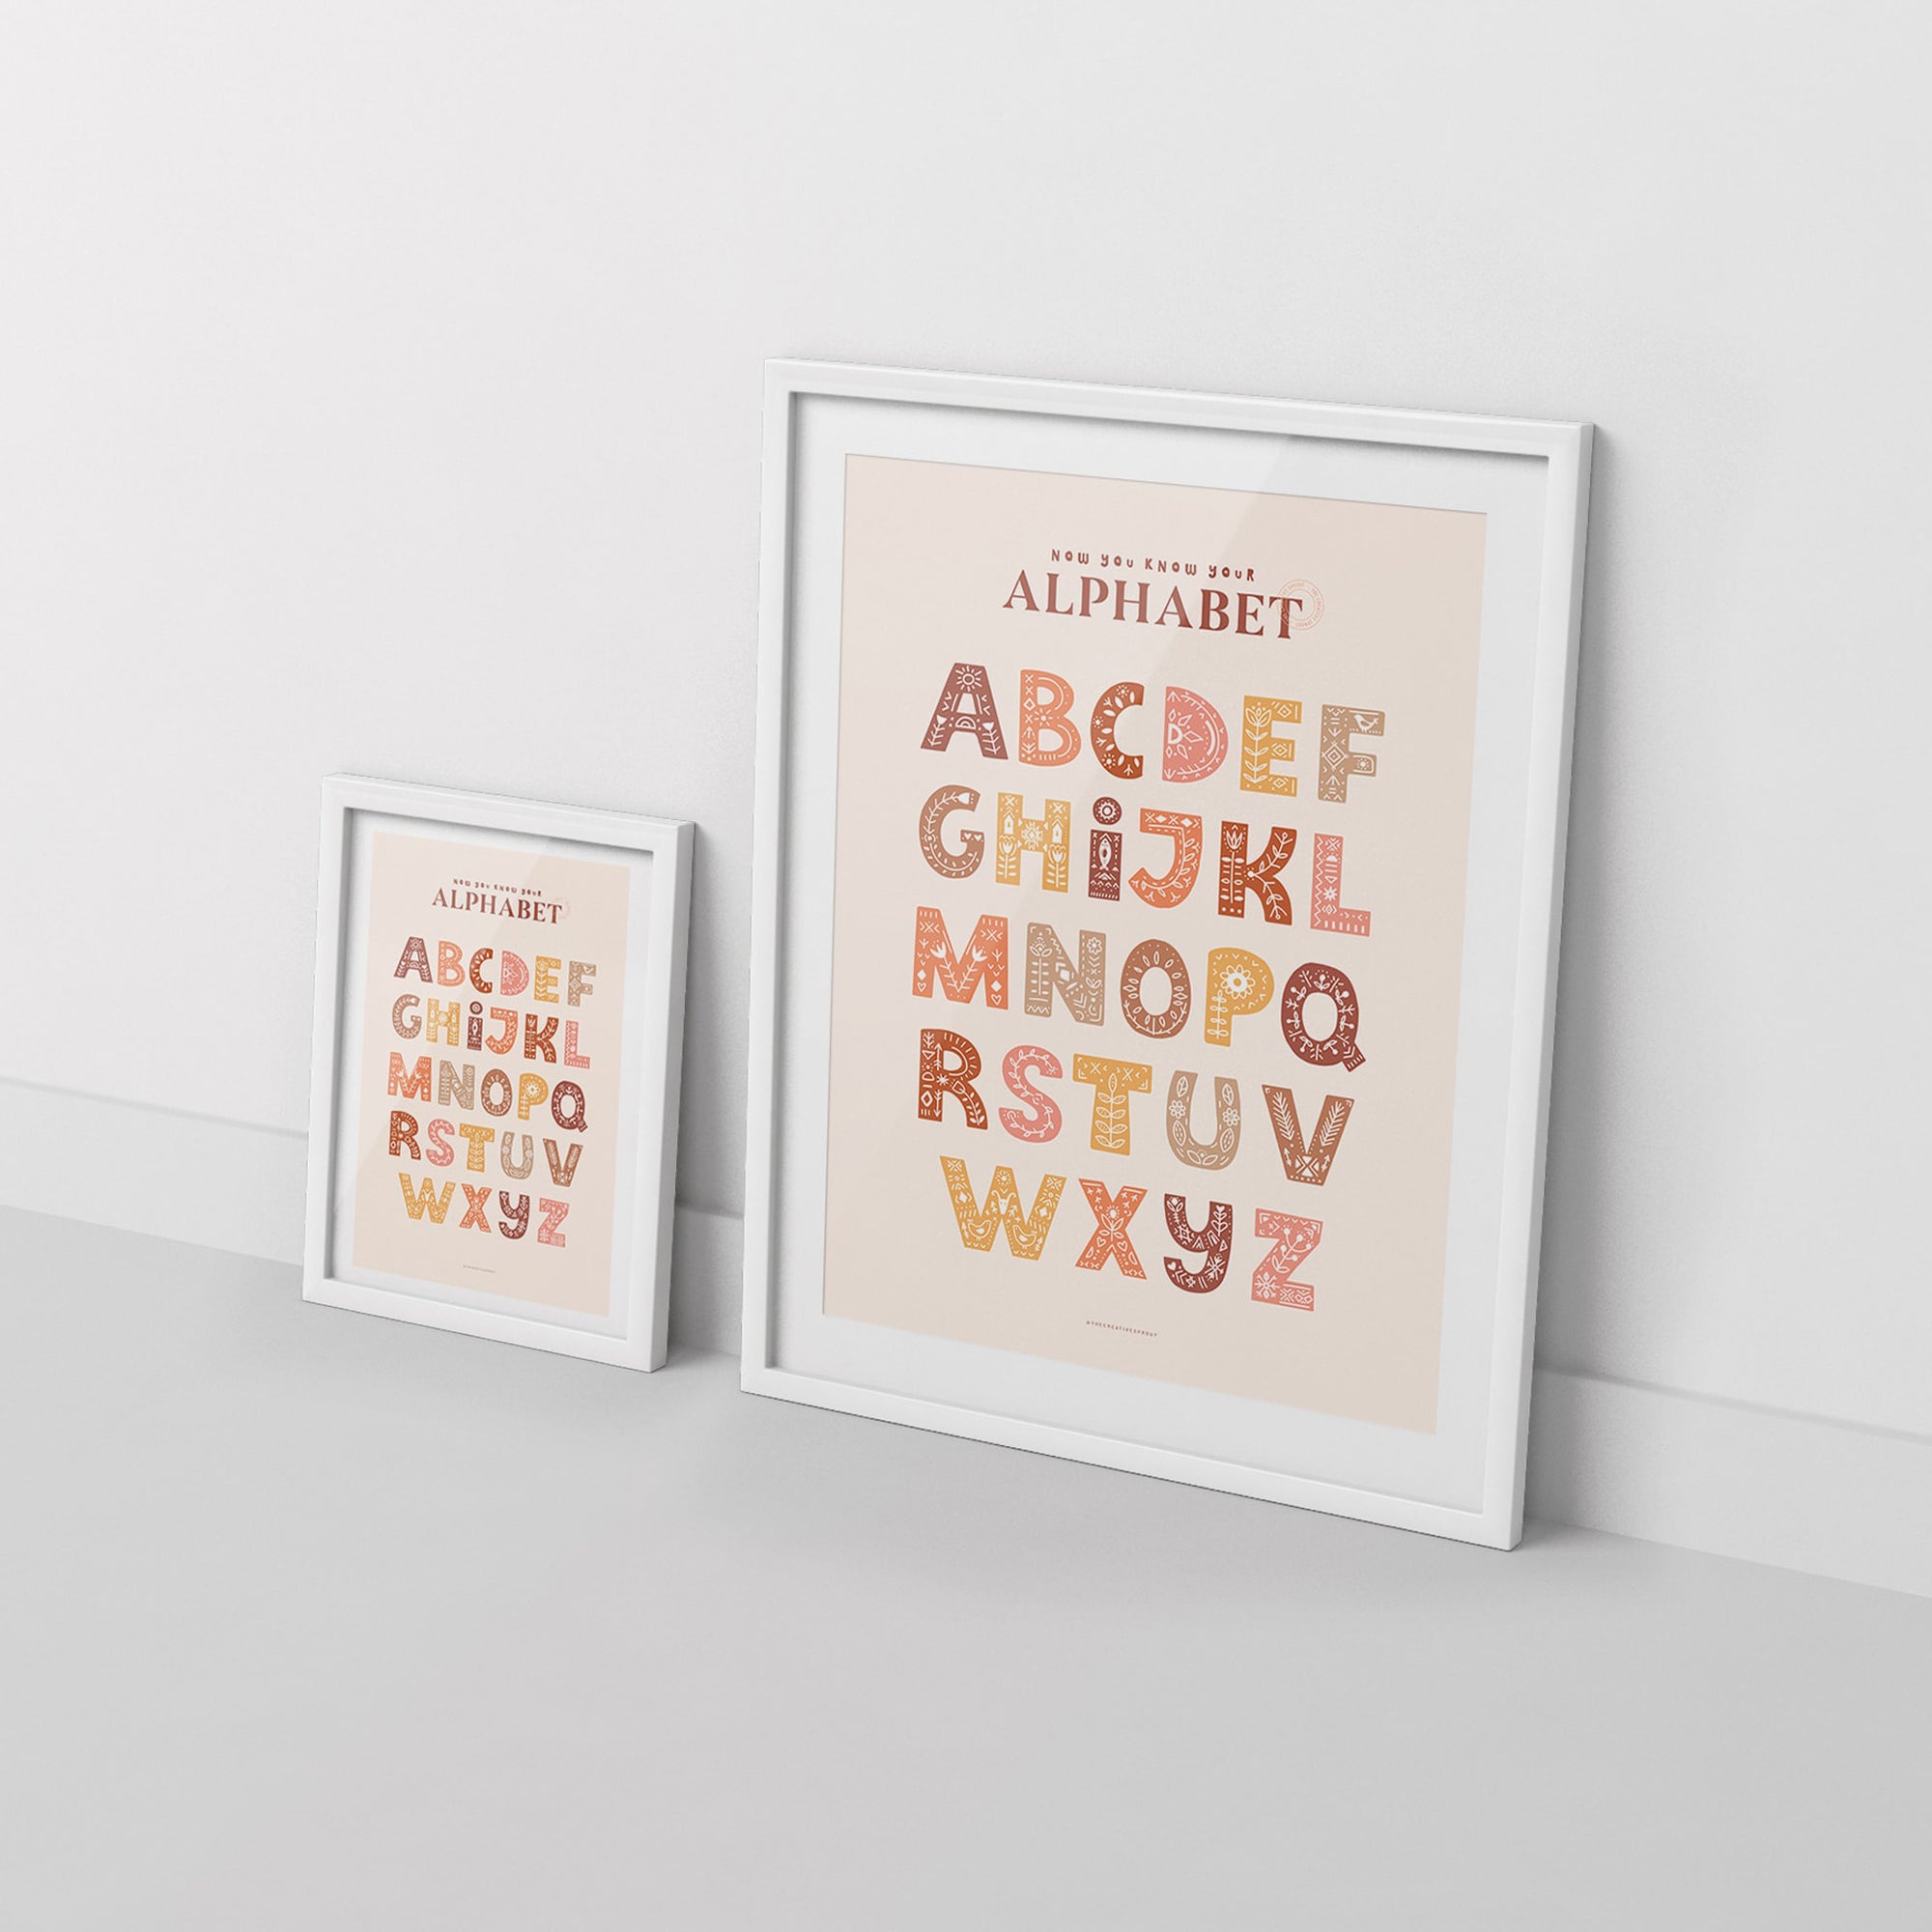 2 framed alphabet posters in boho style, leaning against white wall